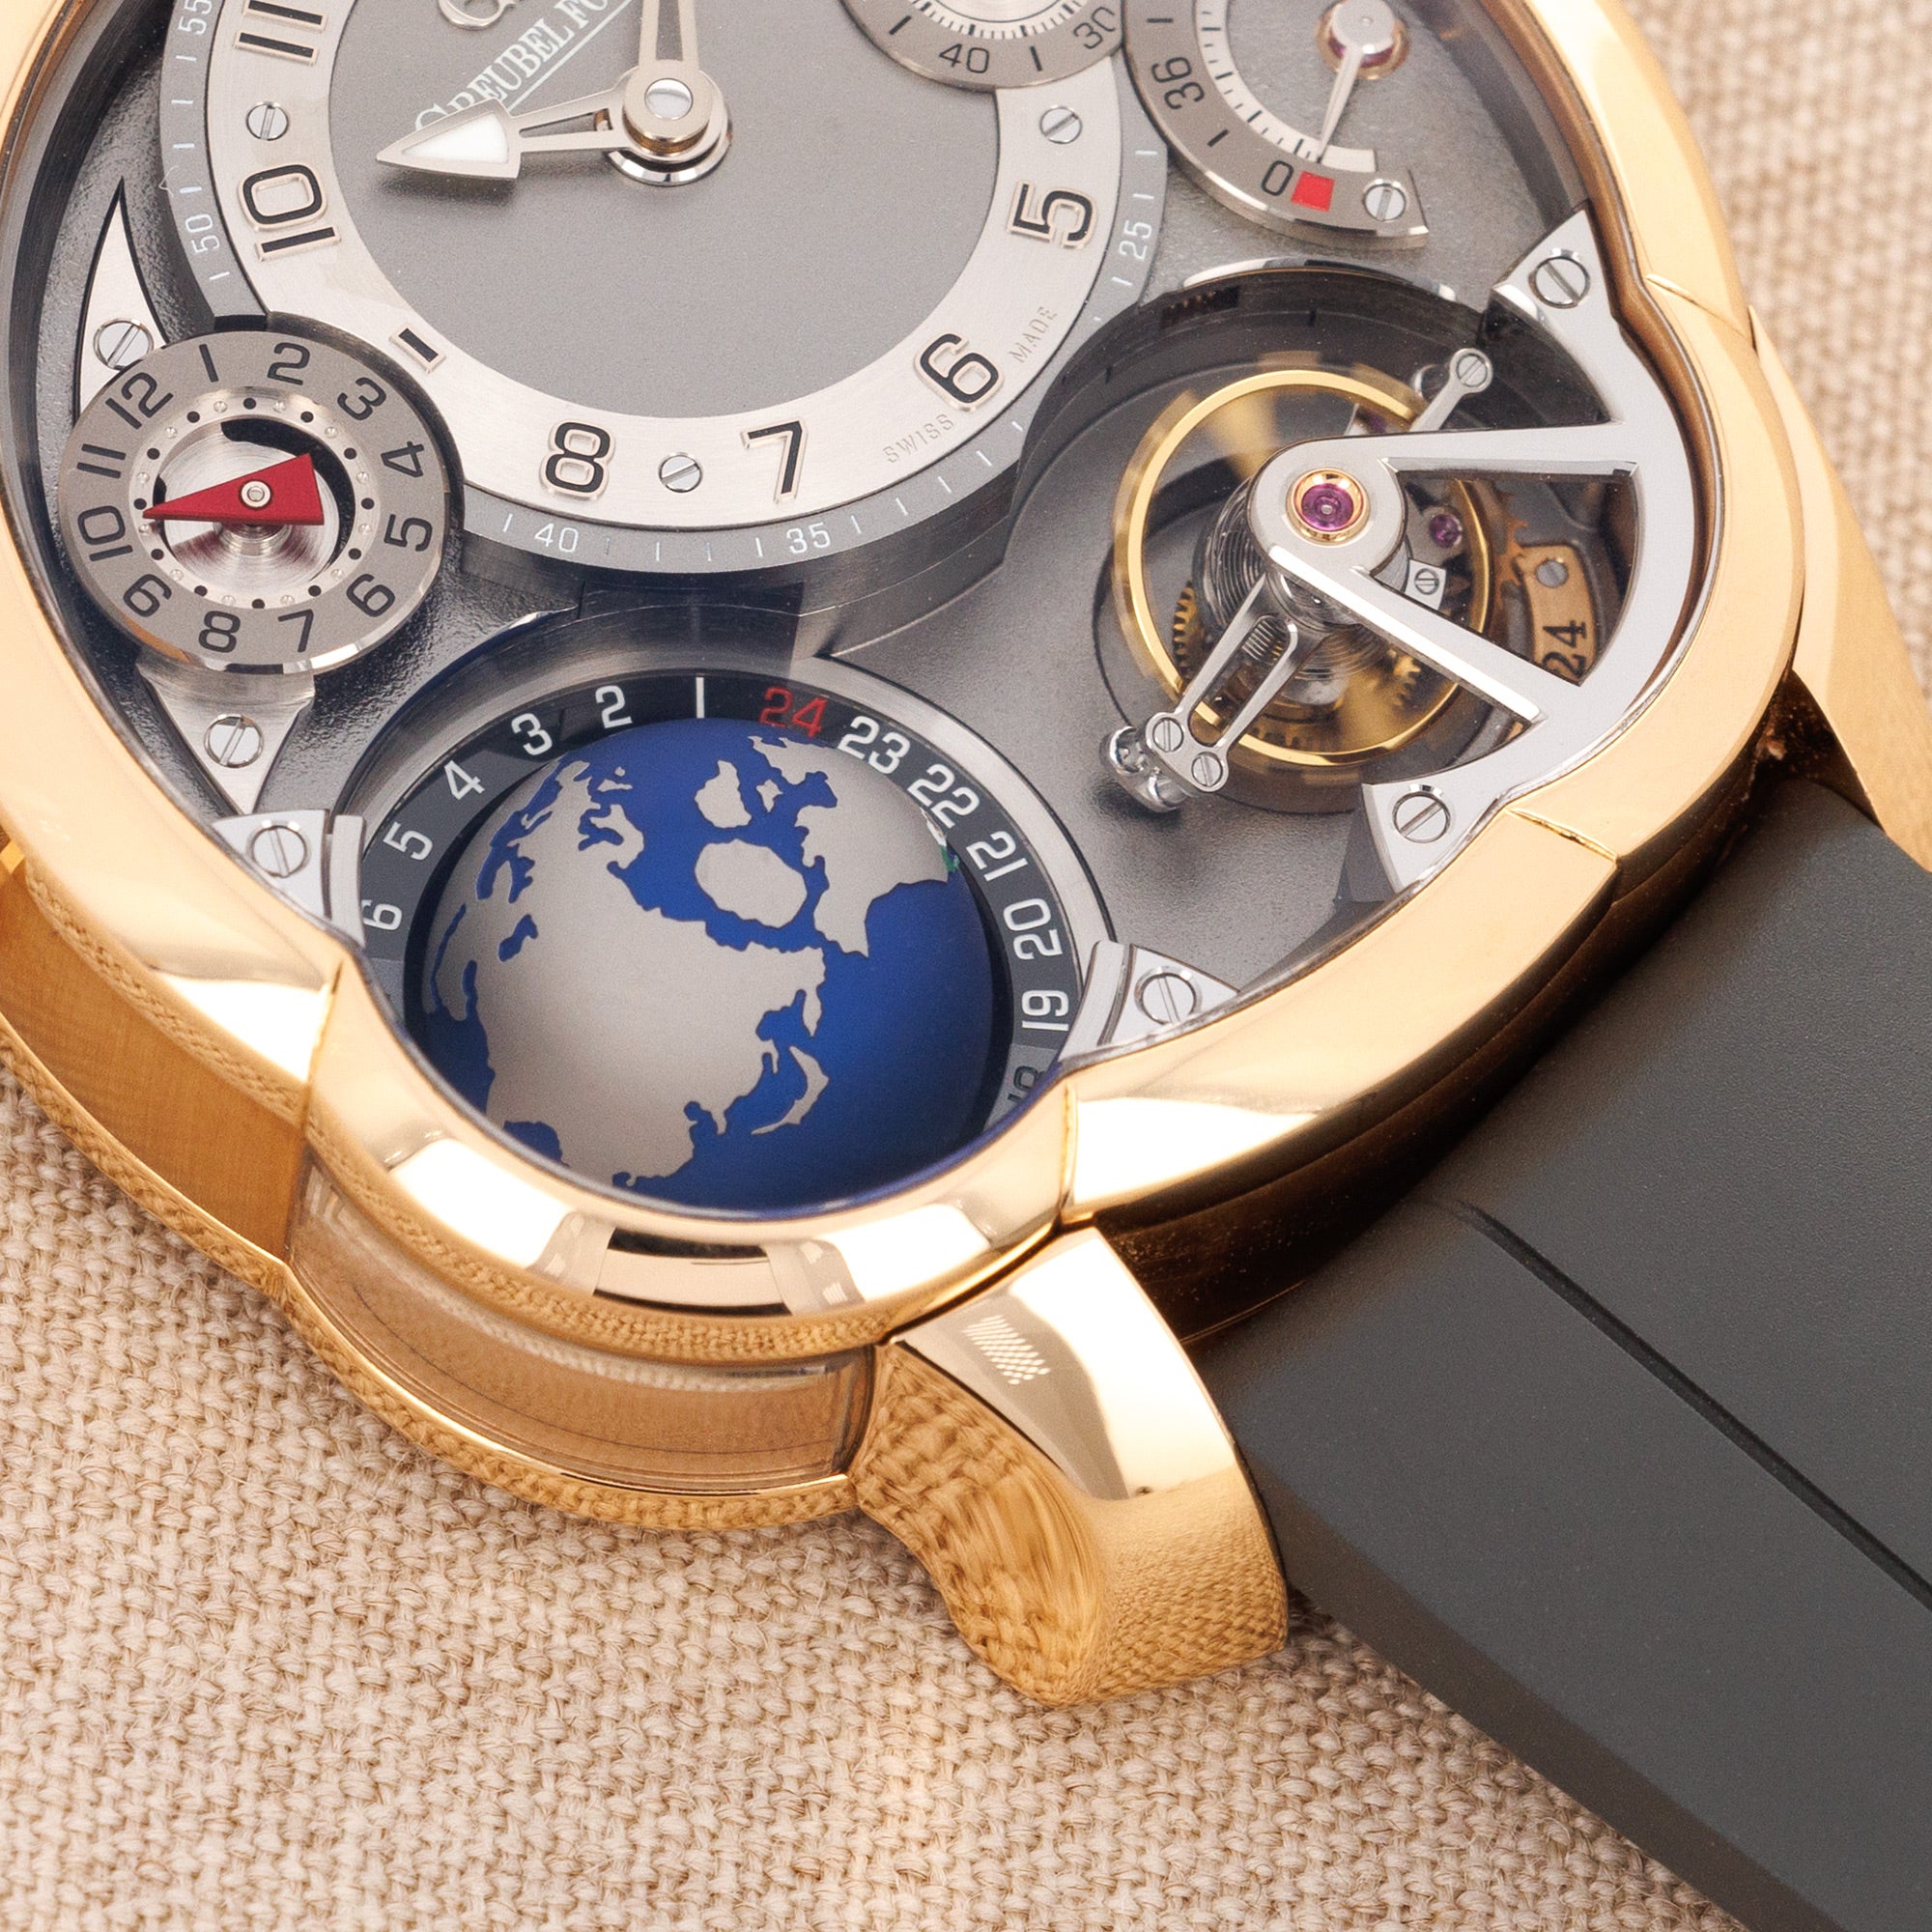 Greubel Forsey - Greubel Forsey Rose Gold GMT Globe GF05 97805 Tourbillon - The Keystone Watches